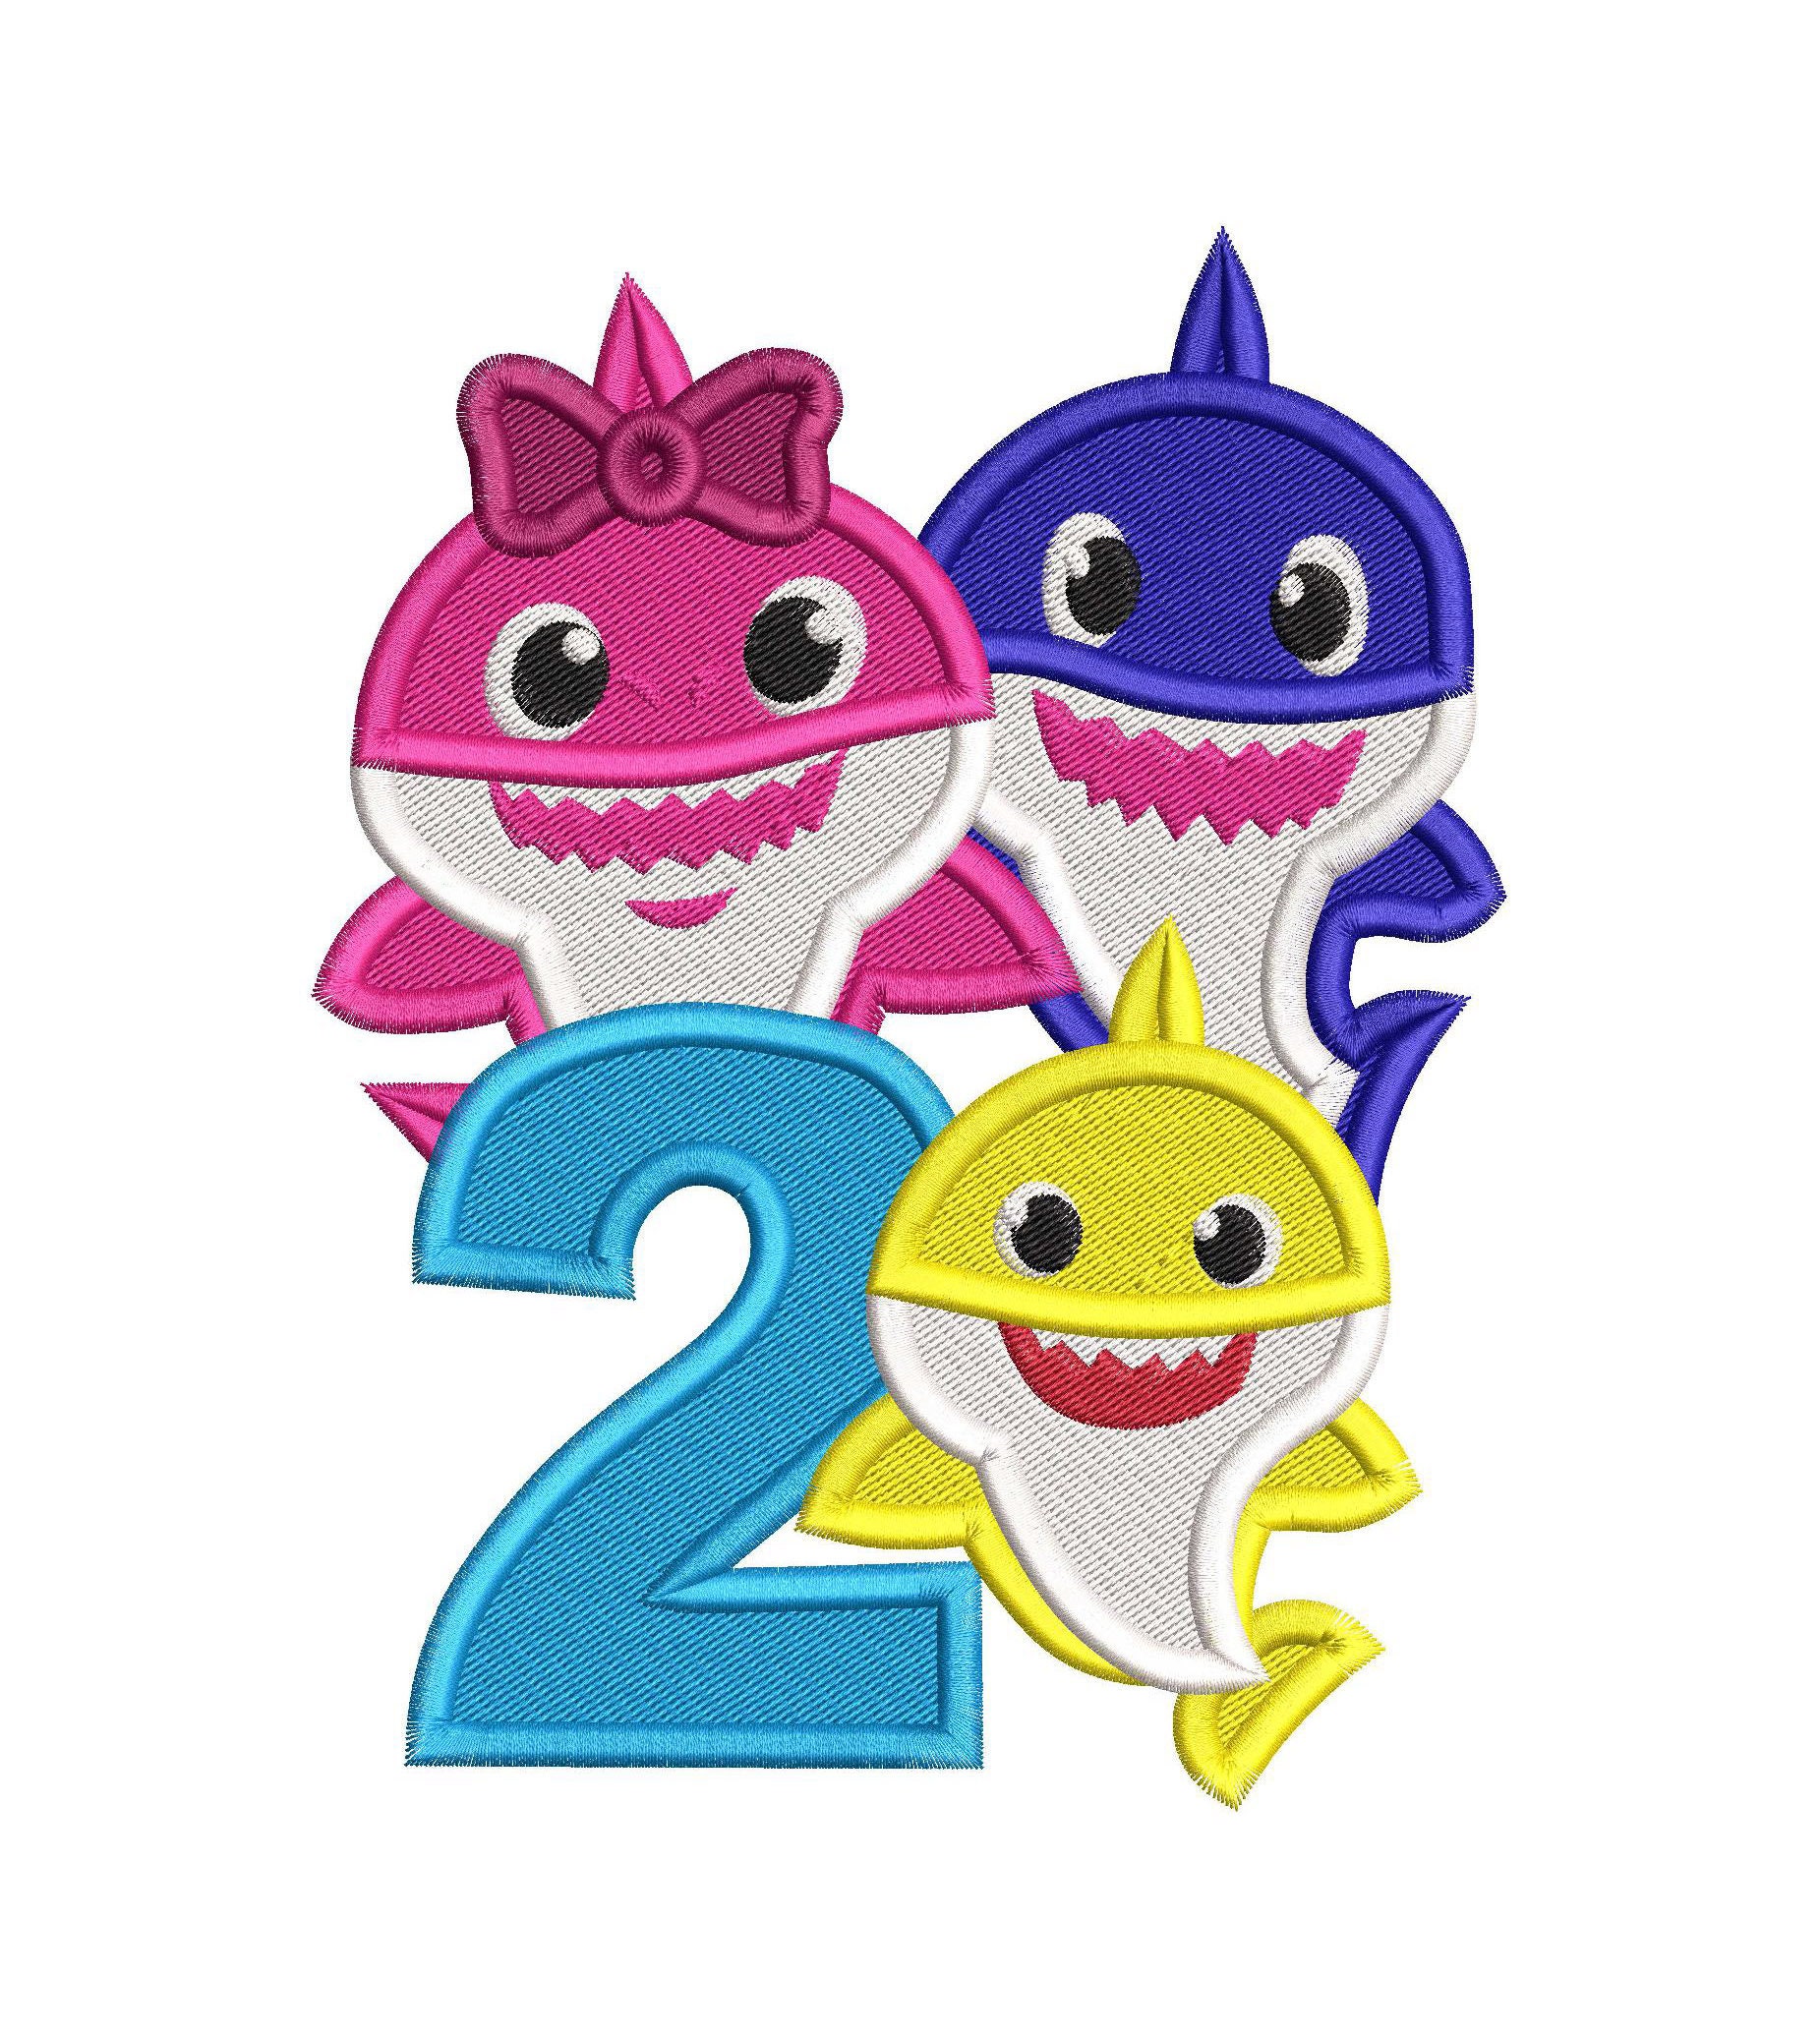 Baby Shark With Birthday Number 2 Applique Machine Embroidery Design ...